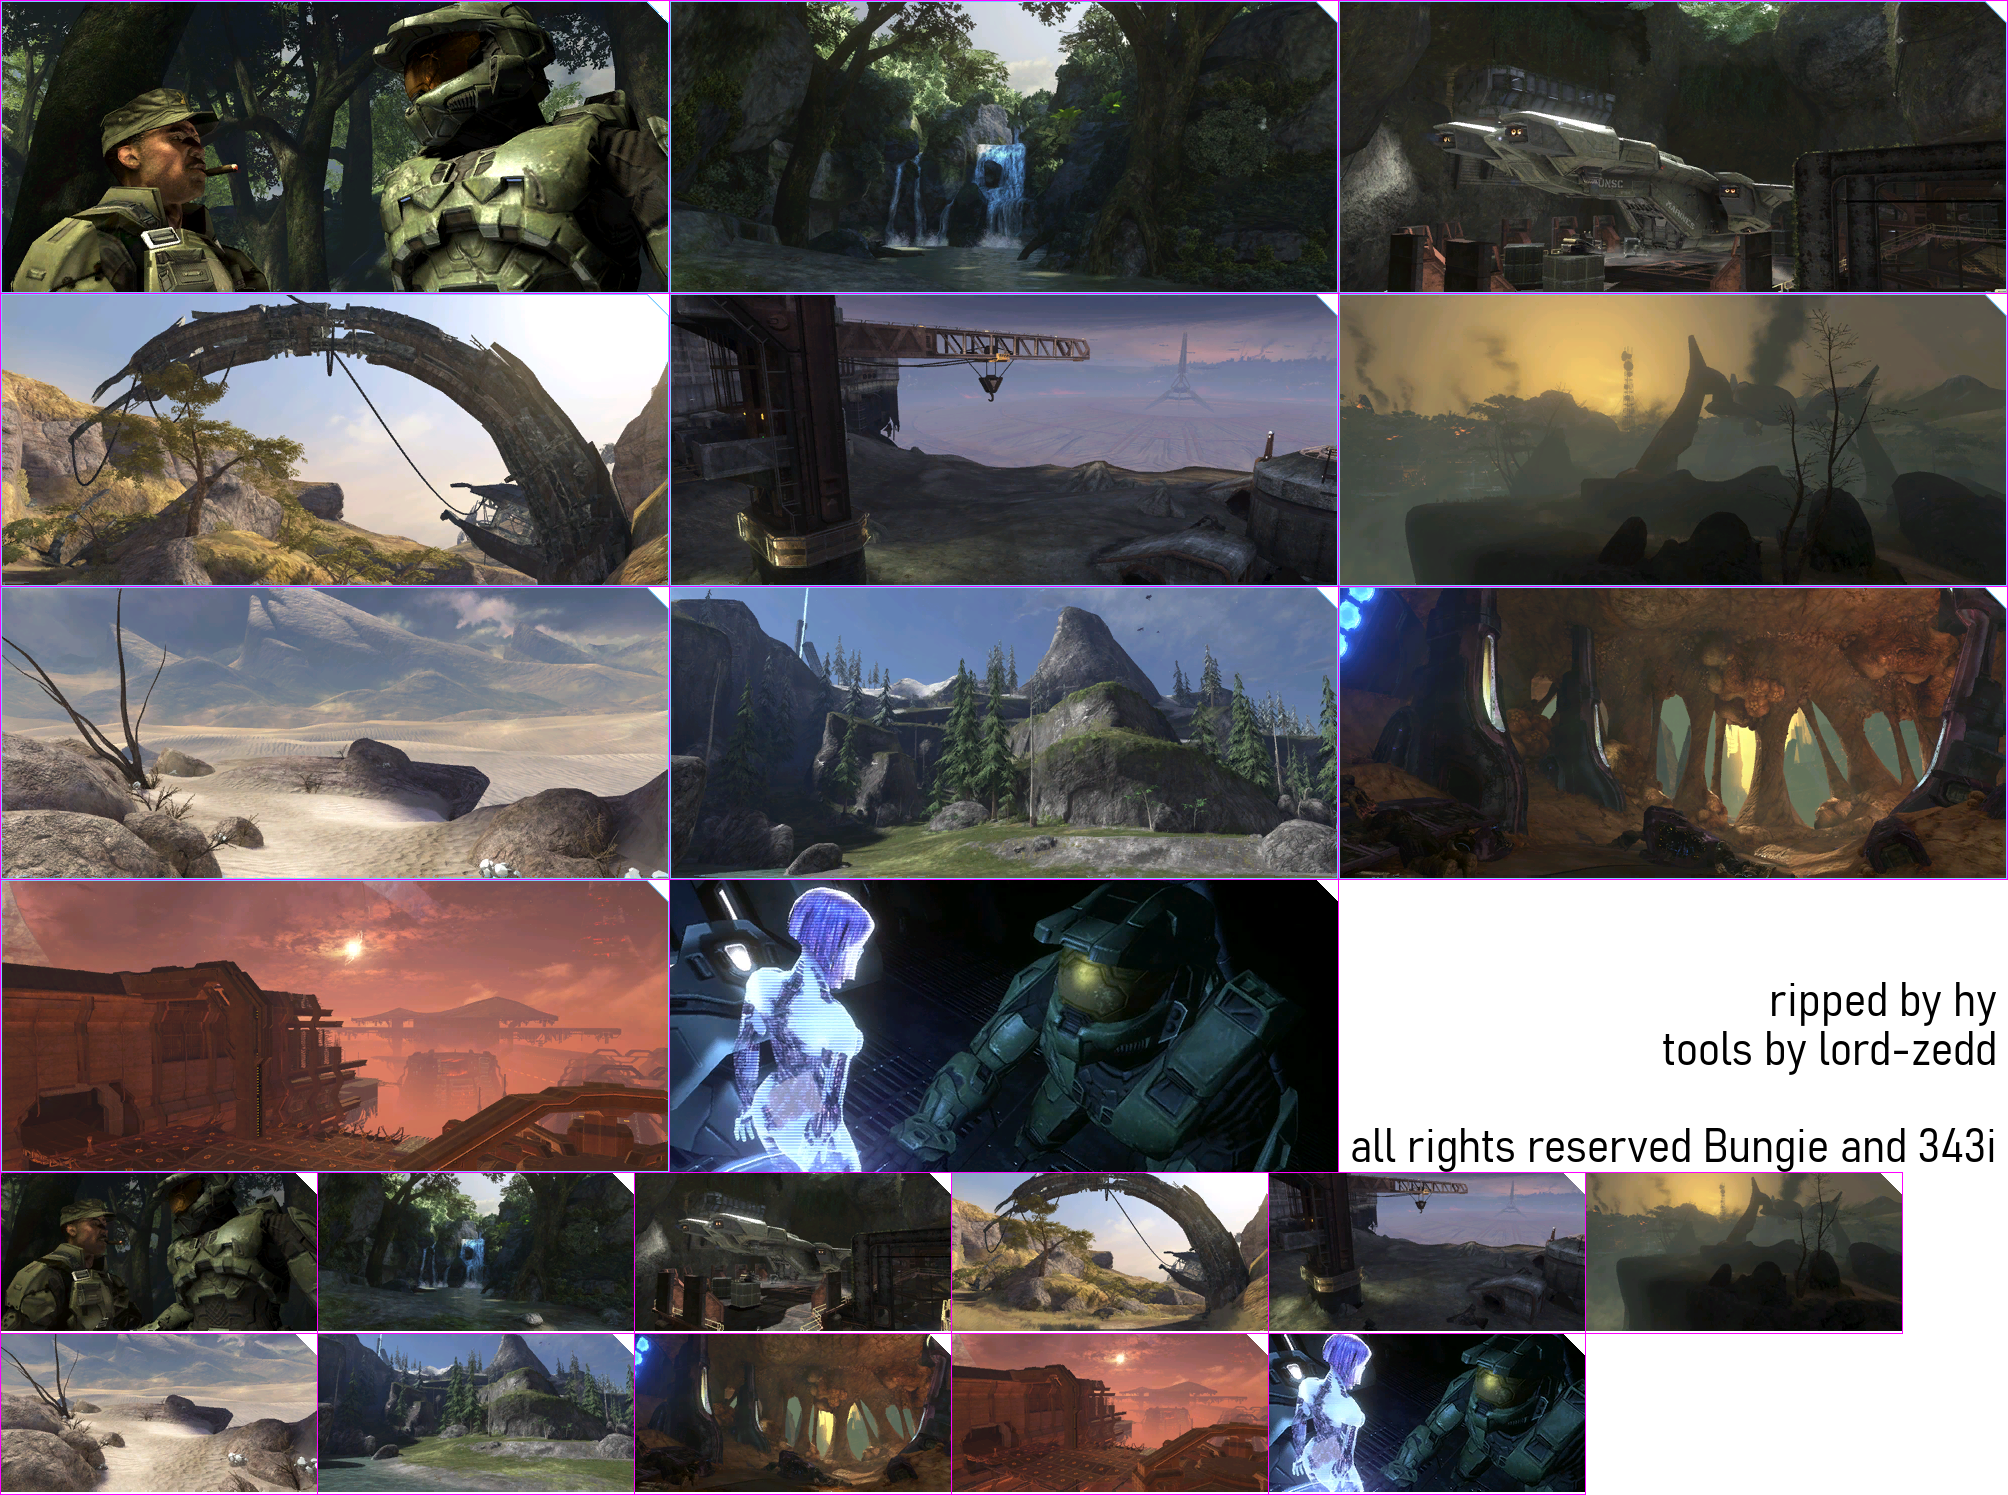 Halo: The Master Chief Collection - Halo 3 Campaign Level Previews